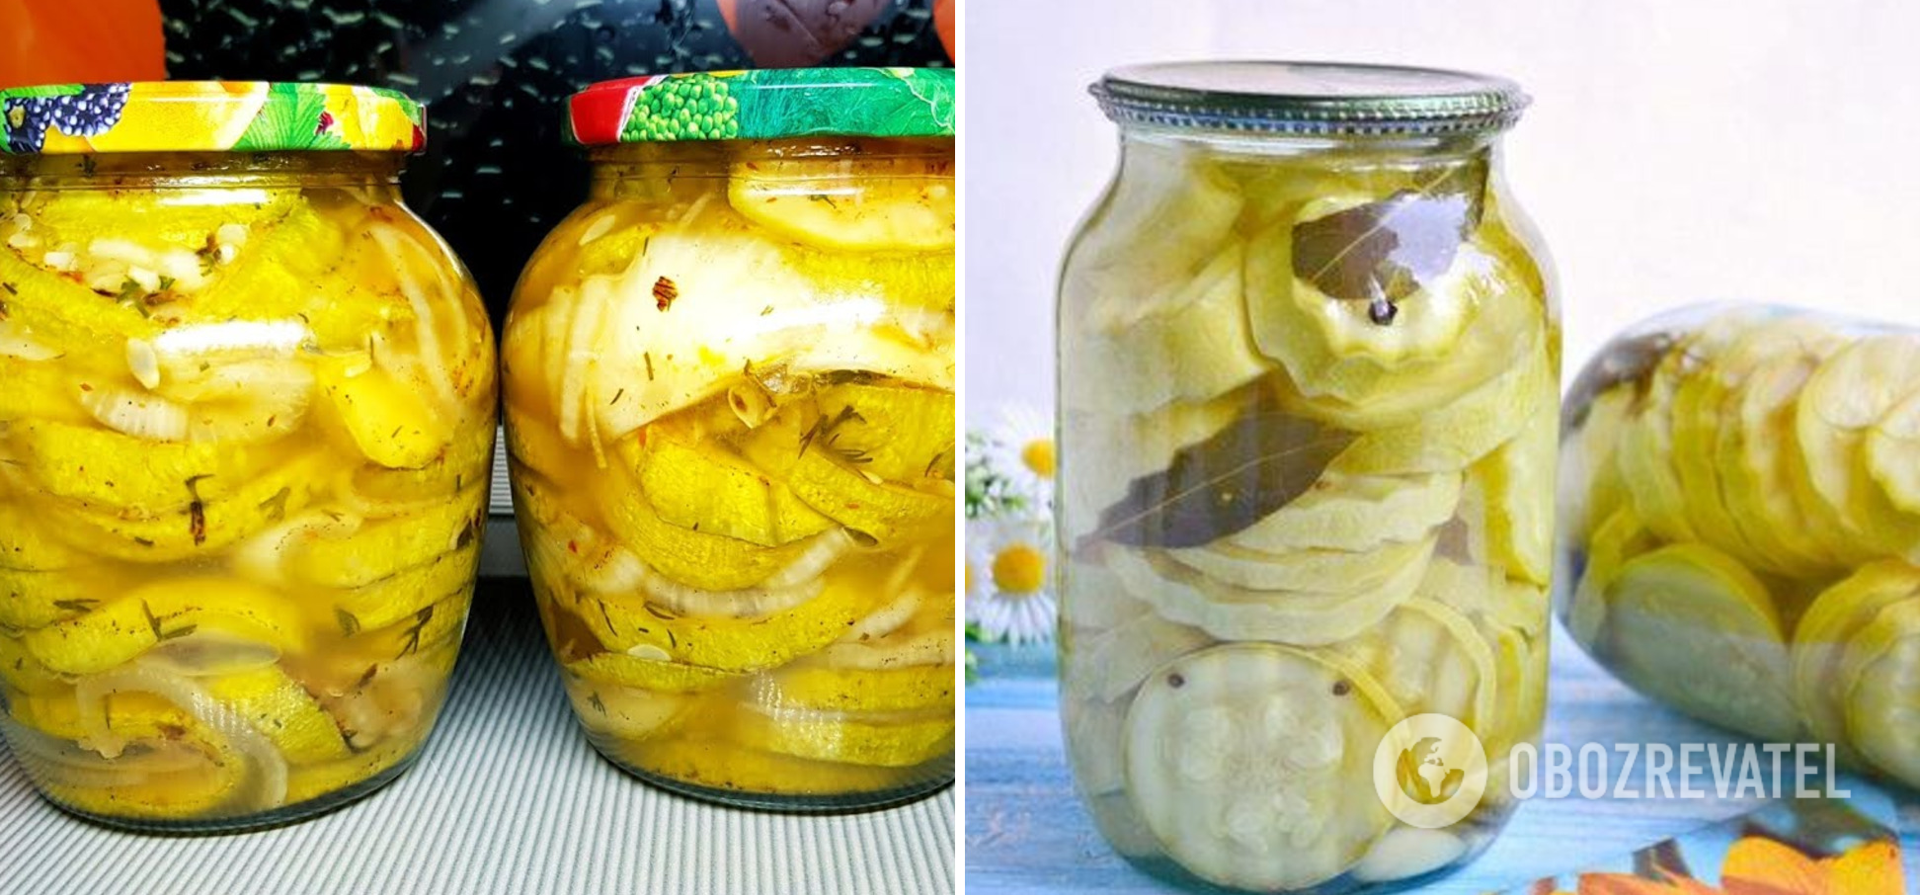 Why zucchini jars explode and what to do to prevent this